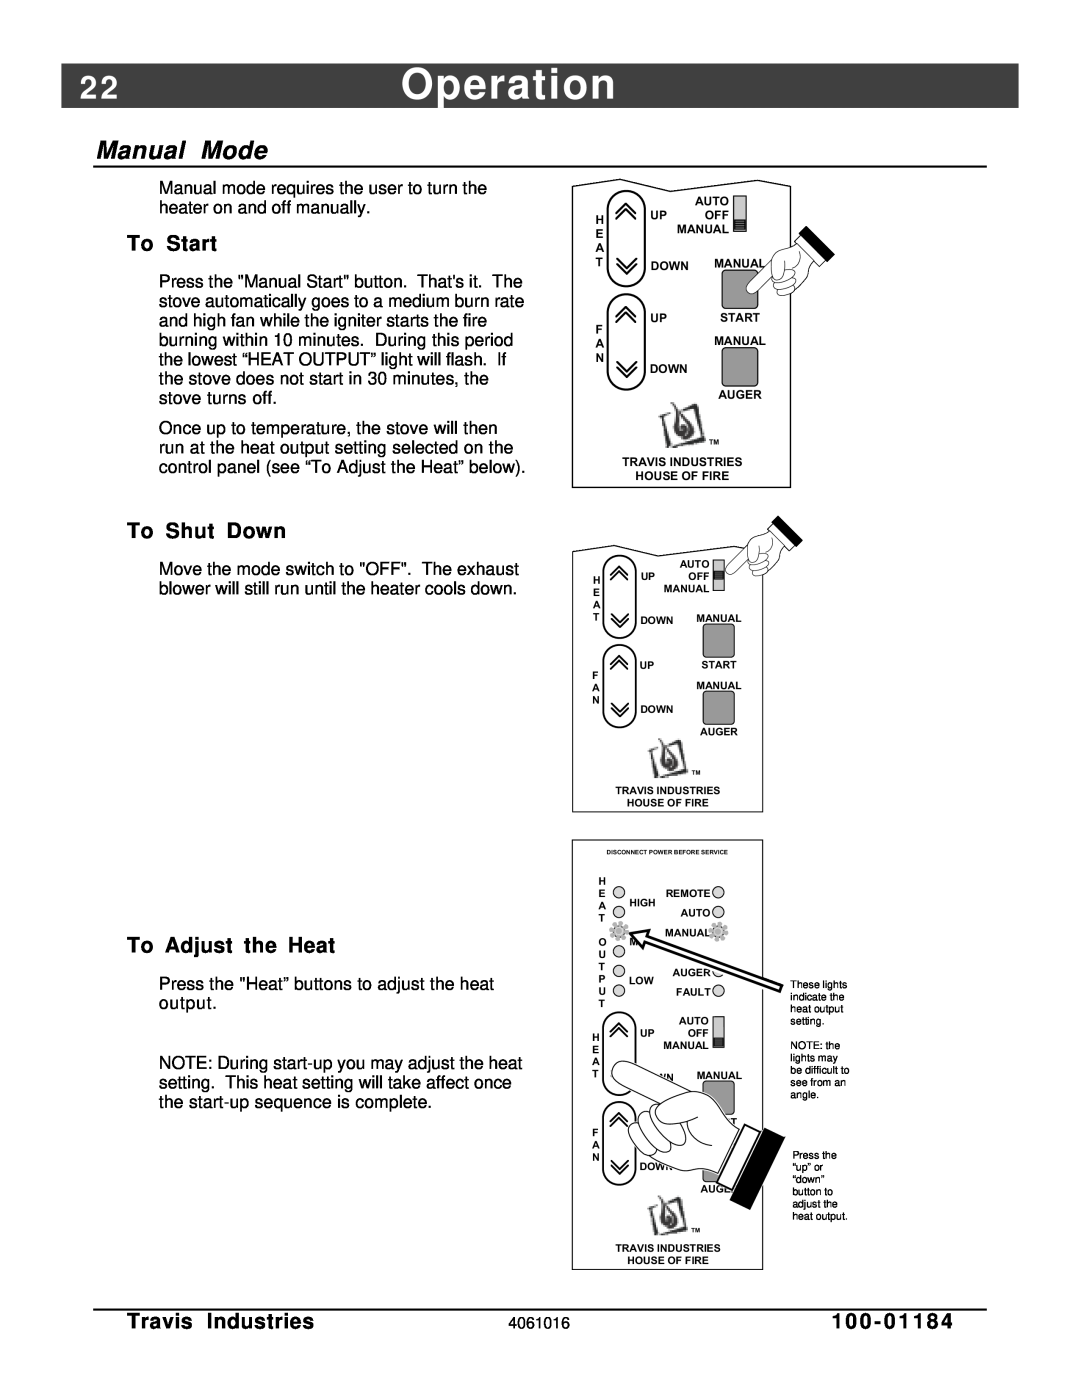 Lopi Leyden Pellet Stove manual 2 2Operation, Manual Mode, To Start, To Shut Down, To Adjust the Heat, Travis Industries 